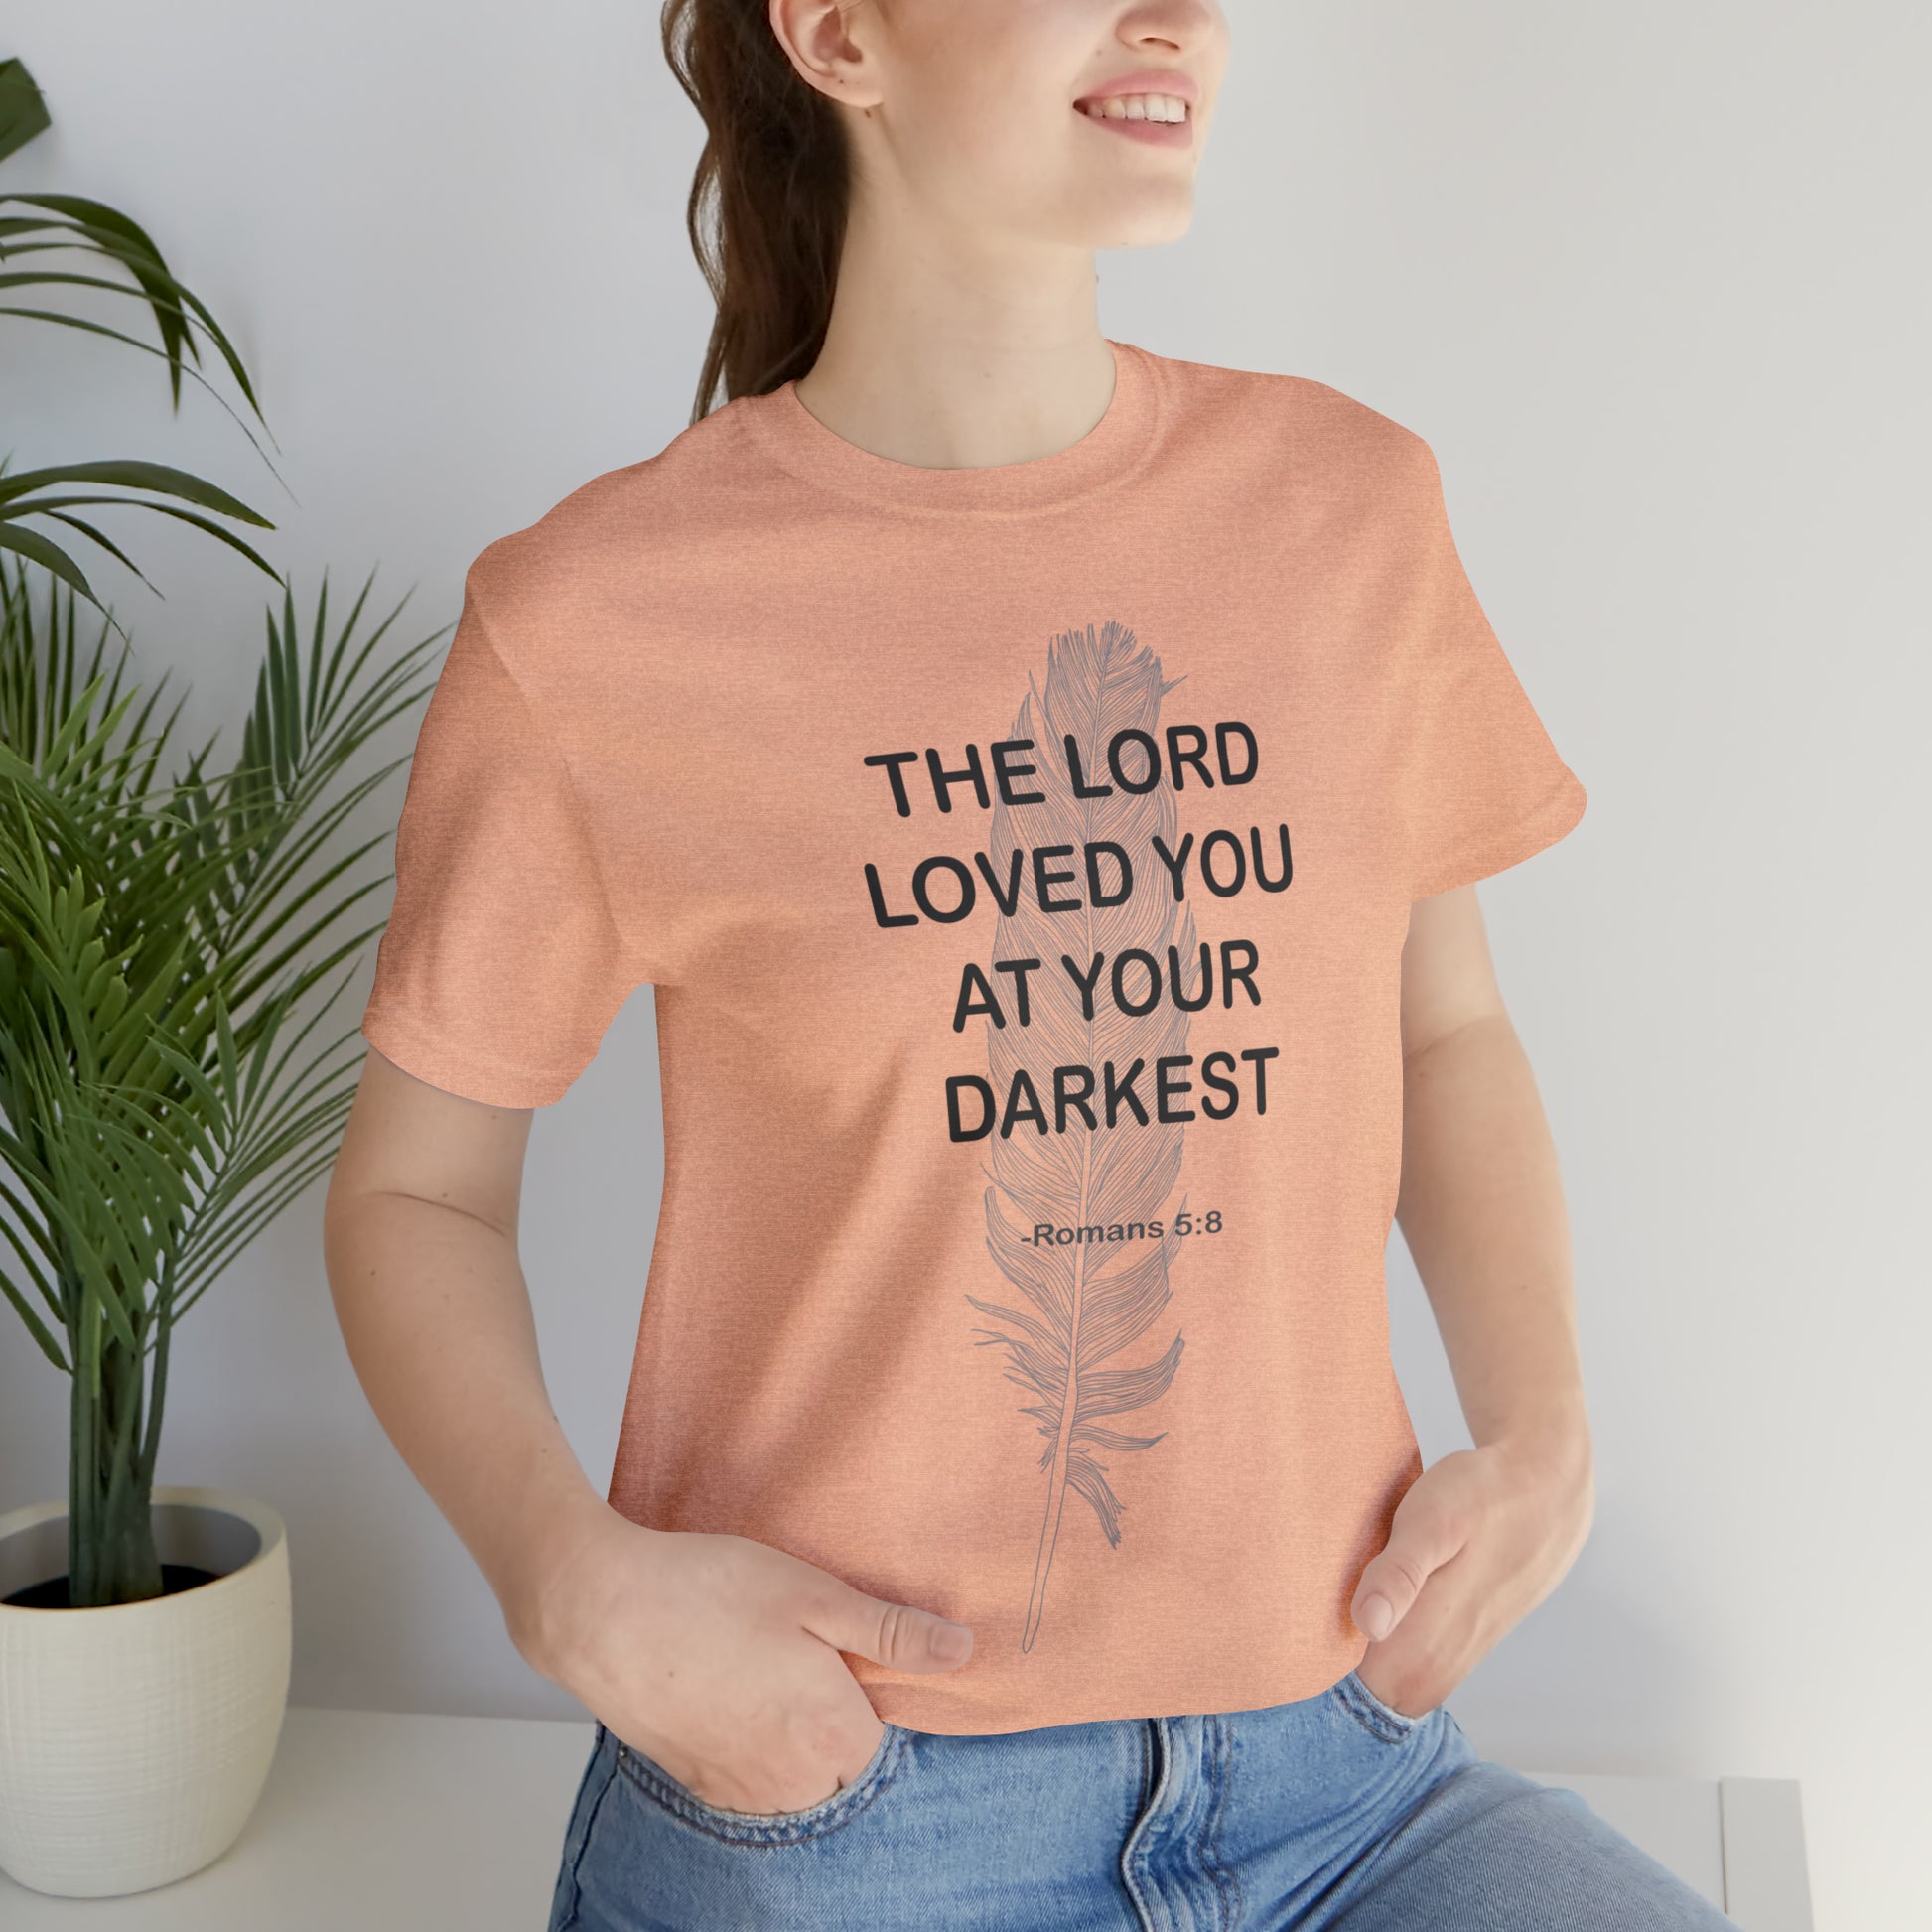 This shirt is the perfect way to share your faith with those around you and let them know that they are not alone in their struggles. With its simple and encouraging message, you can help lead someone to Christ.